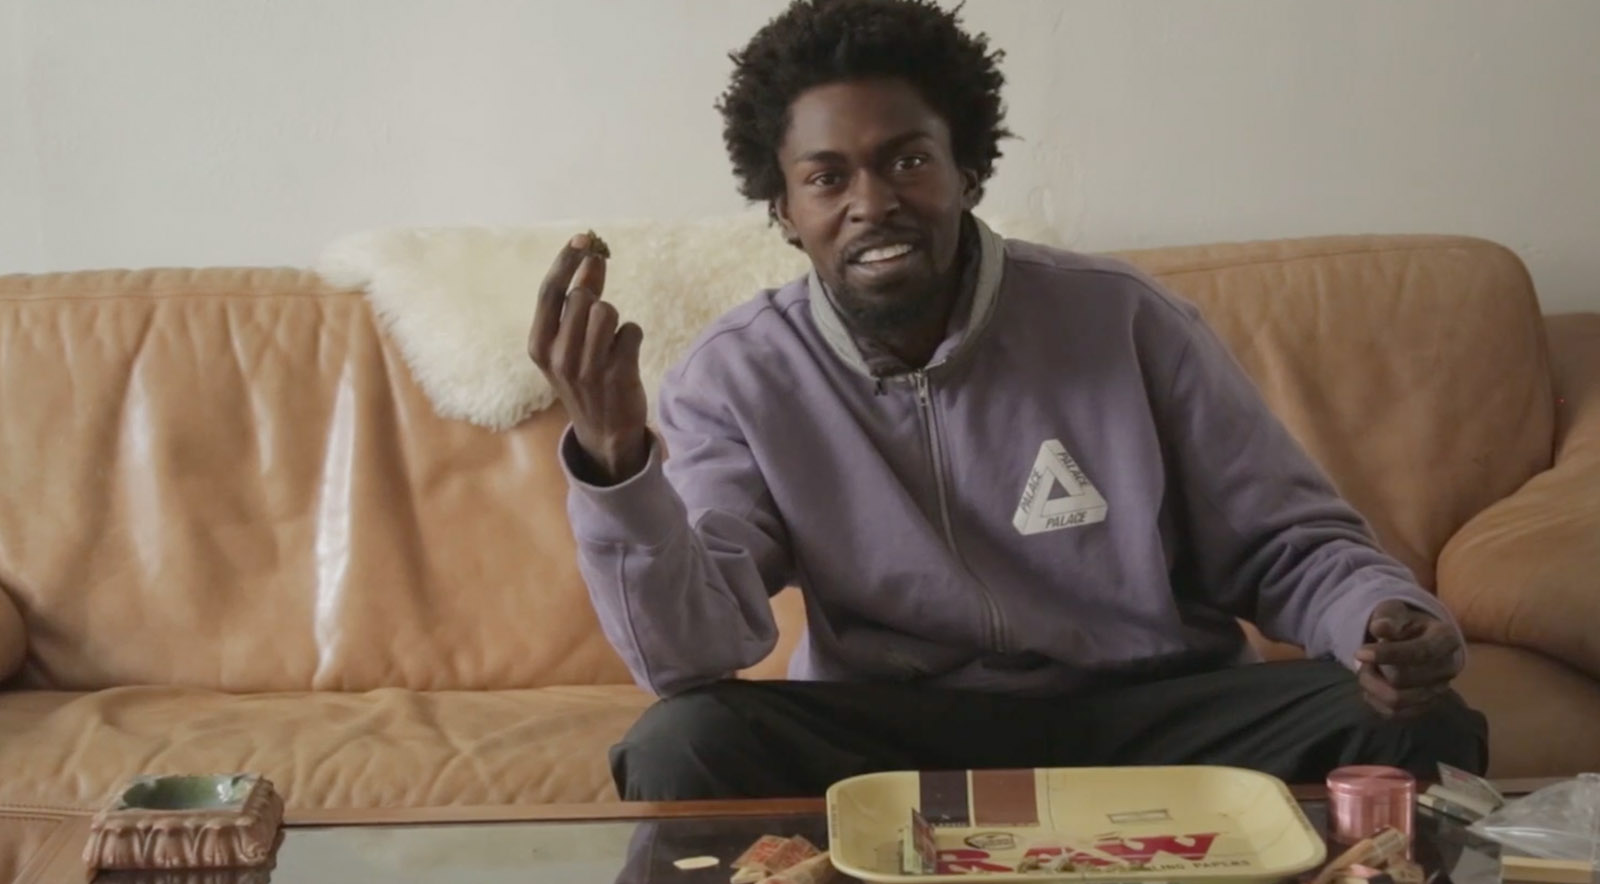 How to Roll the “Nollie Hardflip” of Joints with Skateboarder Jamal Smith